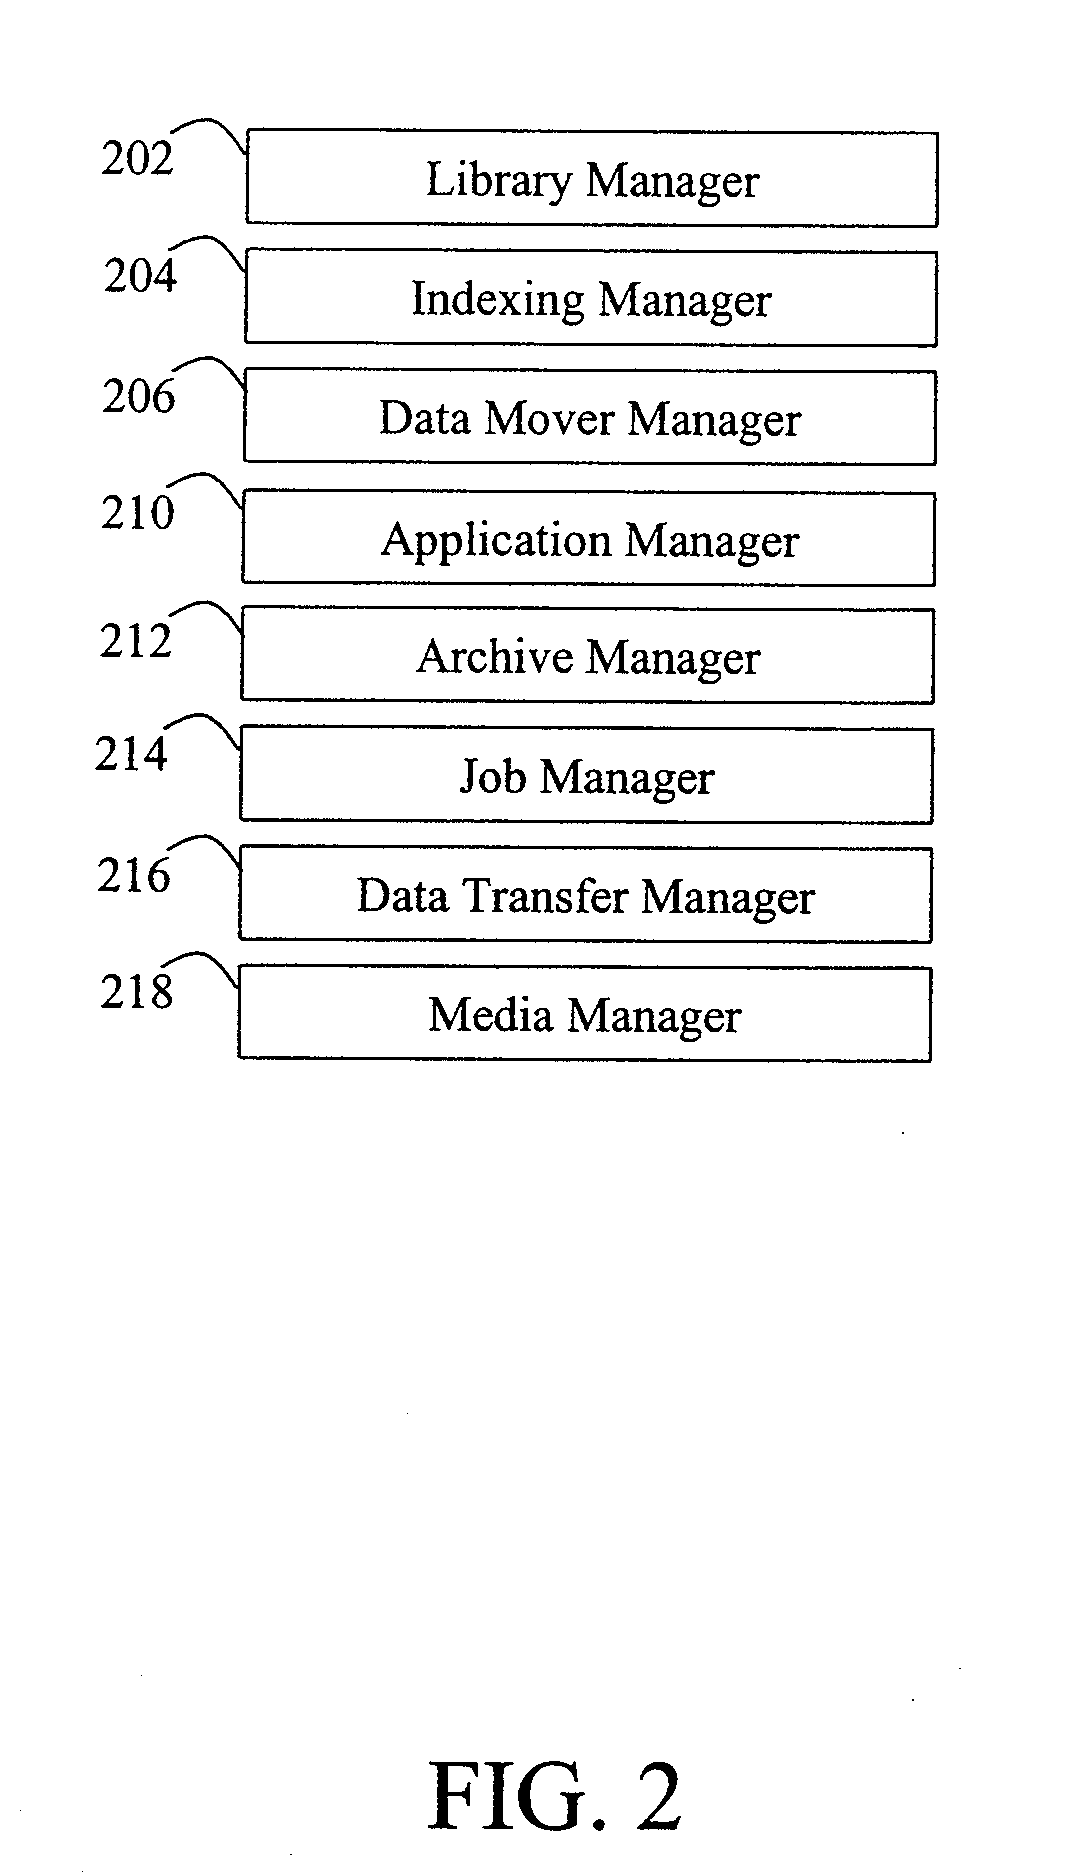 Modular systems and methods for managing data storage operations